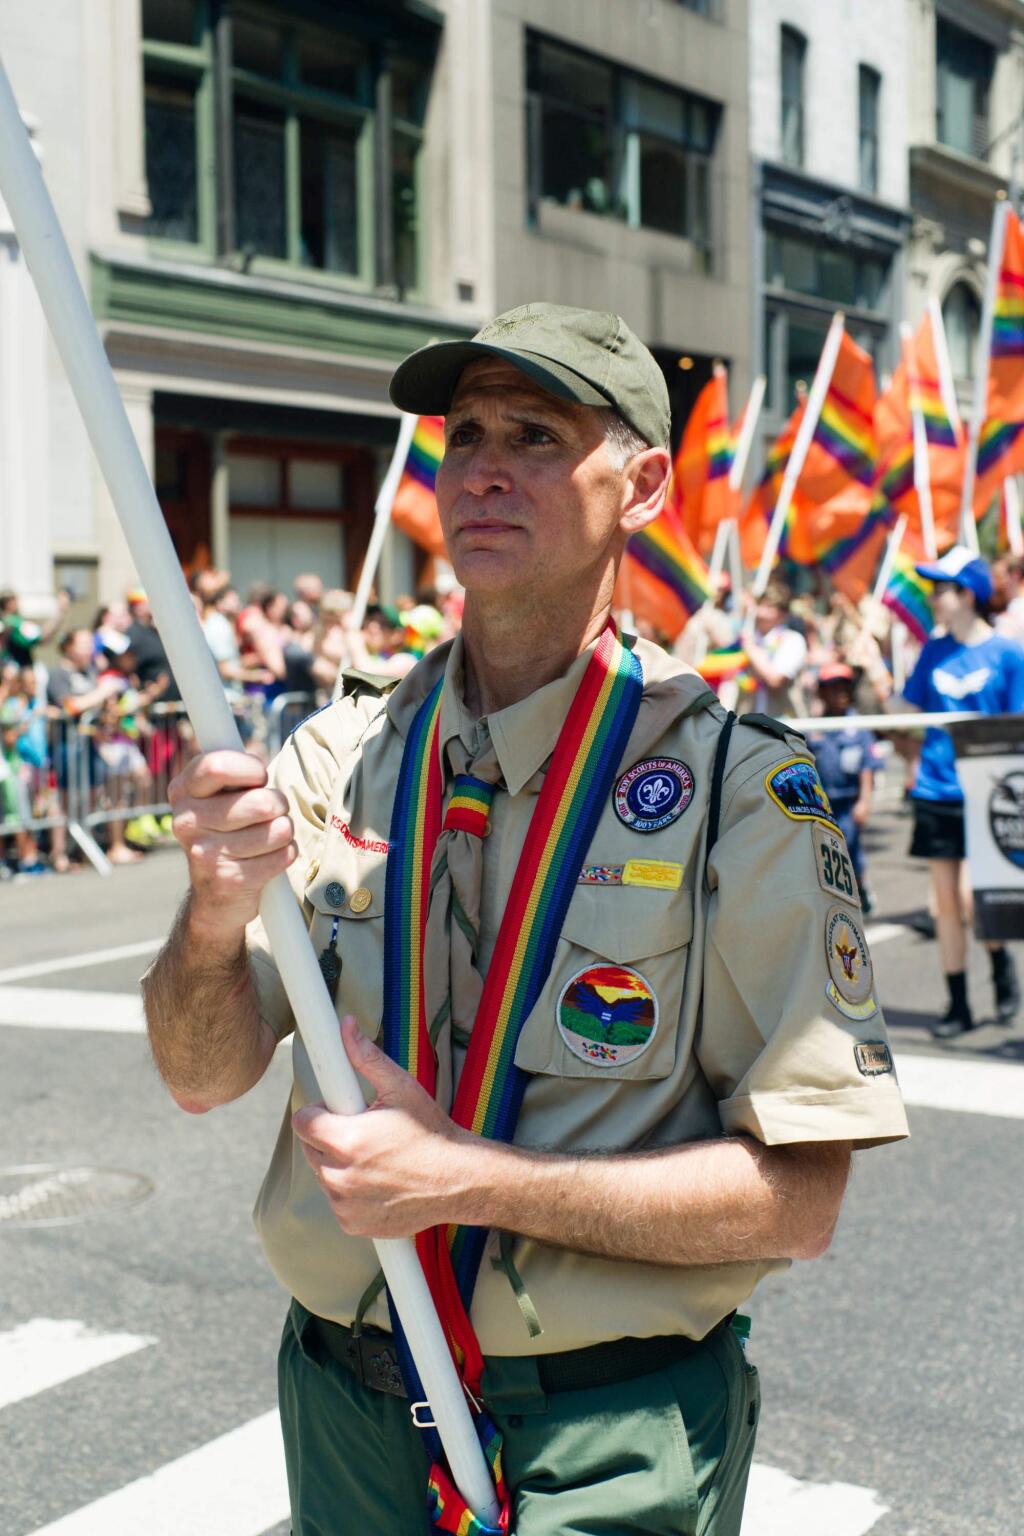 This Sunday, June 26, 2016 photo provided by Brian Gorman shows Greg Bourke from Louisville, Ky., marching in the gay pride parade in New York. Bourke went public with details of how the Archdiocese of Louisville refused to reinstate him as a leader of a Catholic-sponsored Scout troop despite the Boy Scouts of America National Executive Board's decision to end a long-standing blanket ban on participation by openly gay adults. (Brian Gorman via AP)